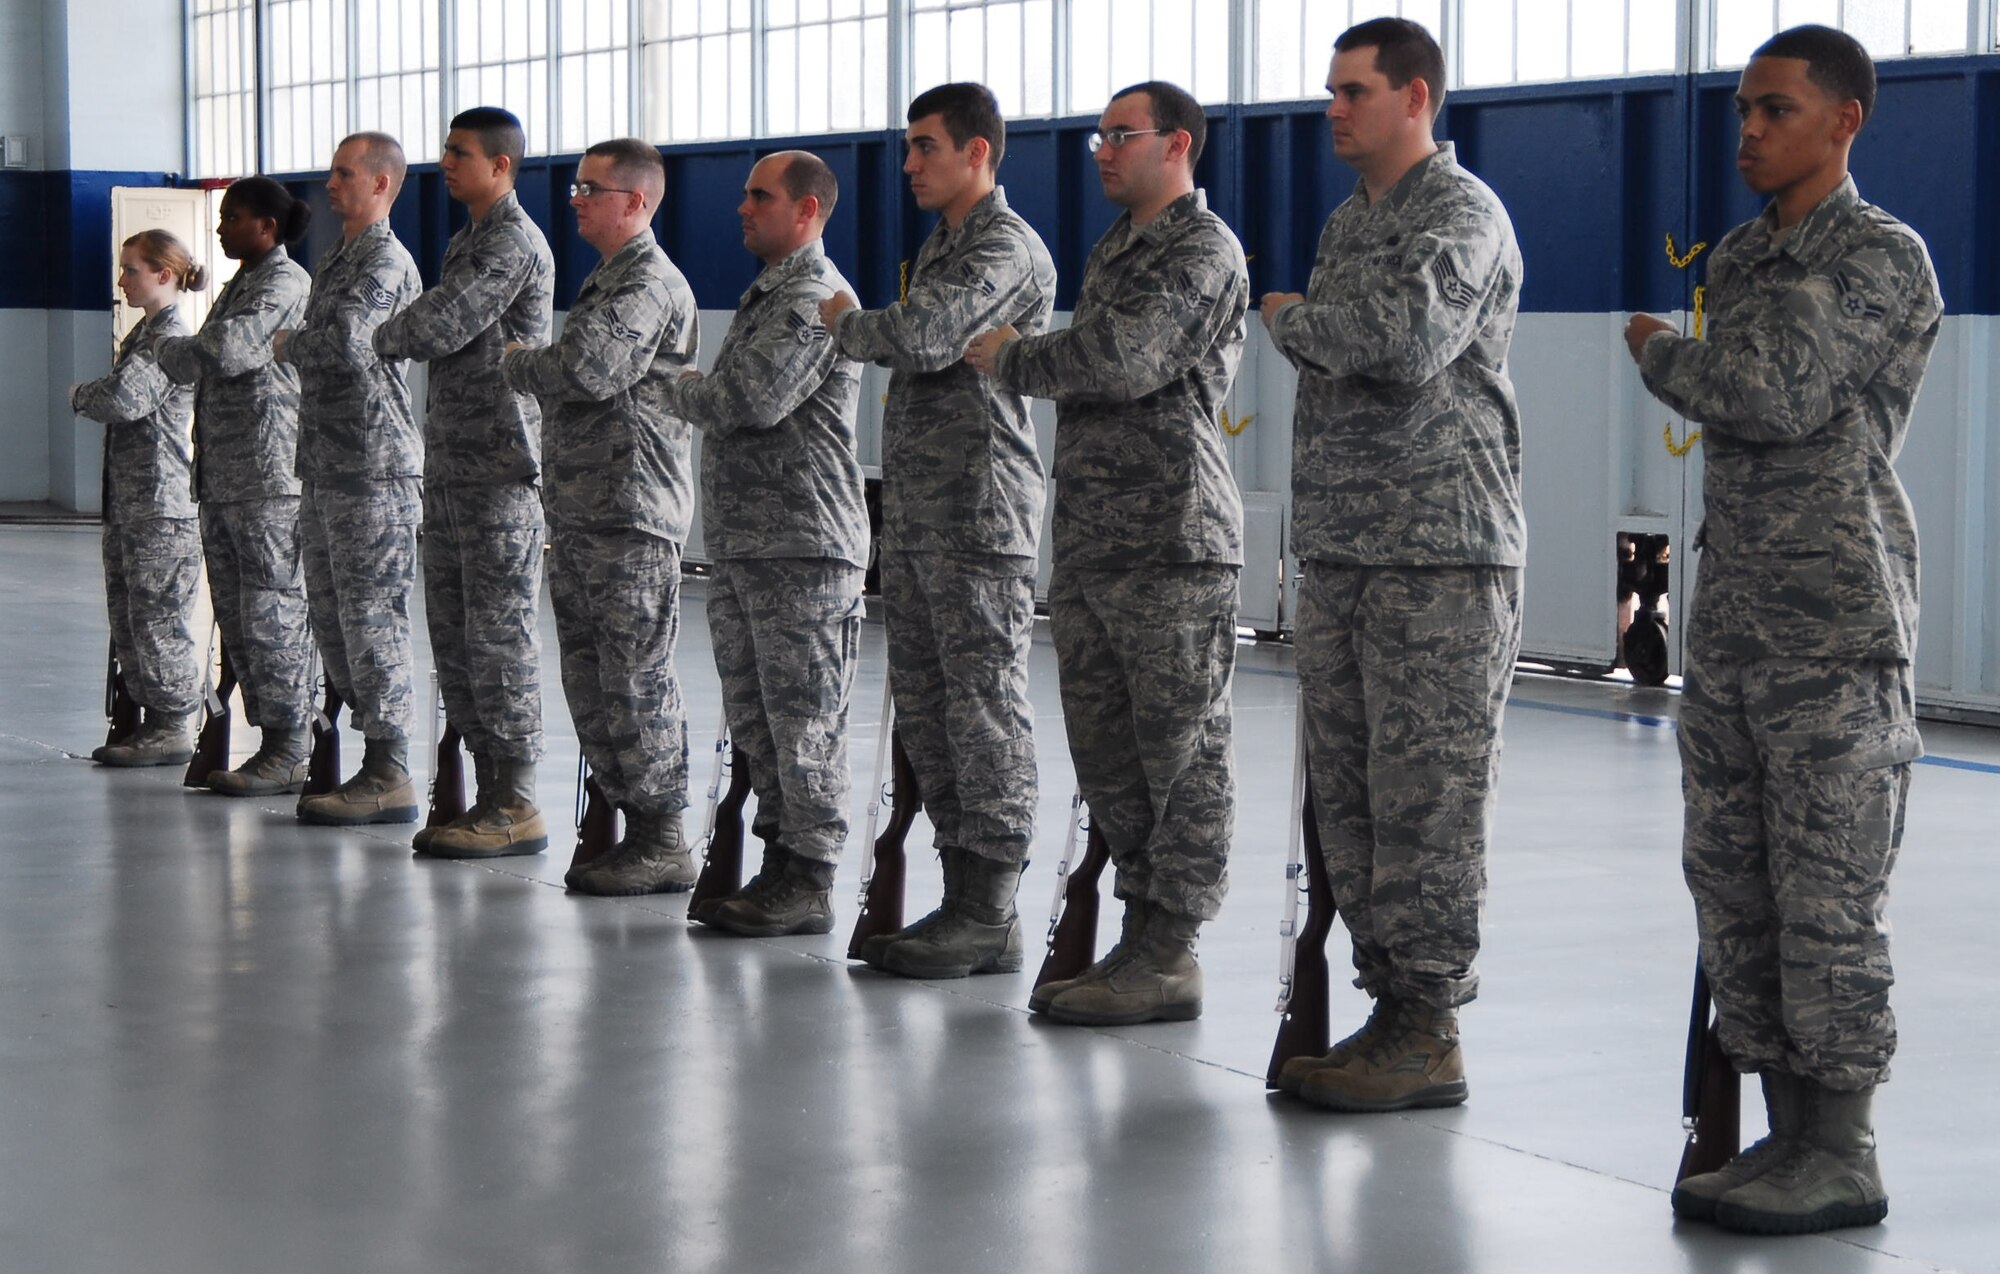 Members of the Maxwell Honor Guard practice ceremonial procedures while being observed by members of the Air Force Honor Guard team. Members of the Air Force Honor Guard from Joint Base Anacostia-Bolling, D.C. regularly travel to provide specialized training to base level honor guard members. (U.S. Air Force photo by Master Sgt. Michael Voss)    